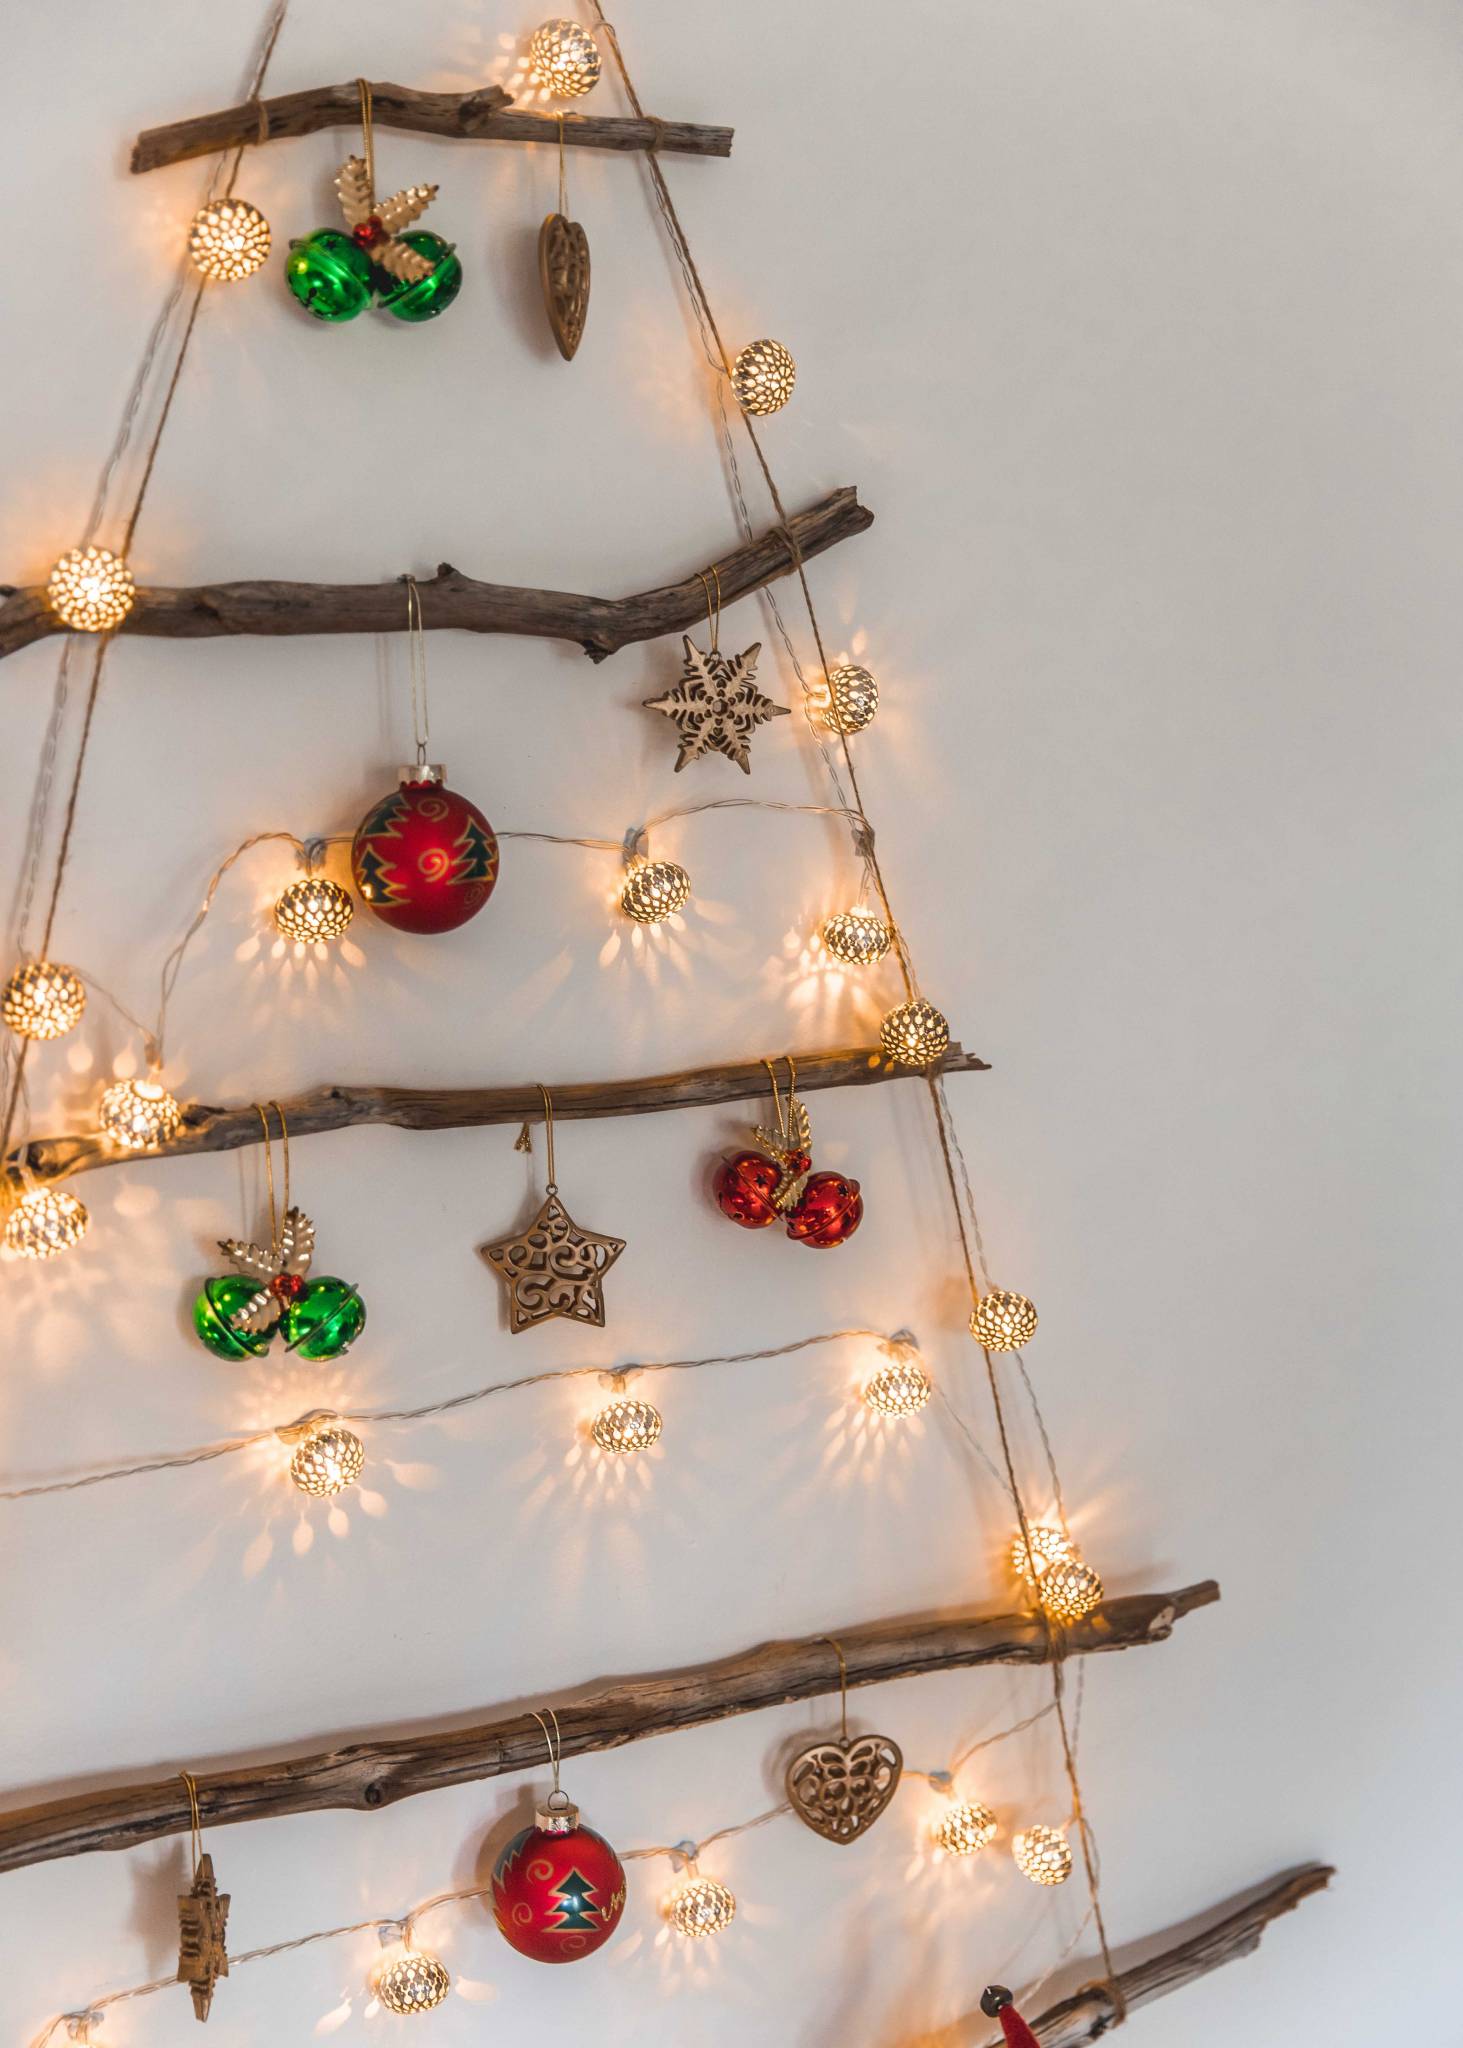 Easy DIY - How to make a Sustainable Christmas Tree | The Green Hub